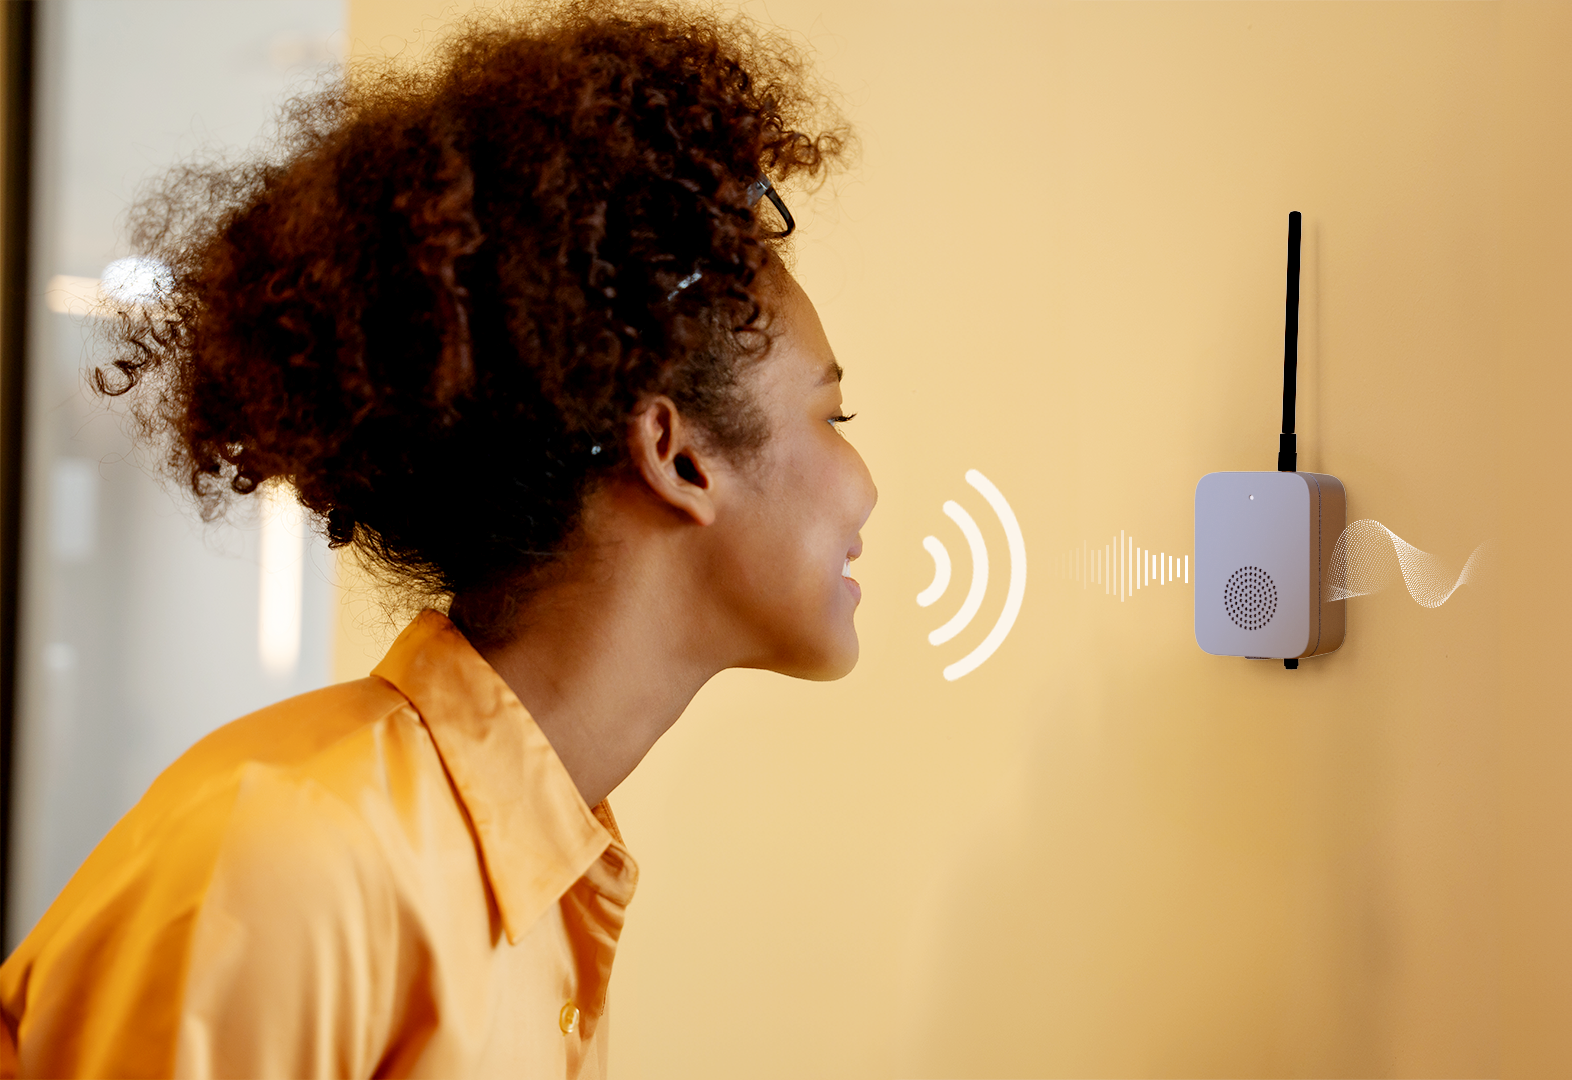 IoT audio technologies enhance smart homes, healthcare, industrial automation, and security.